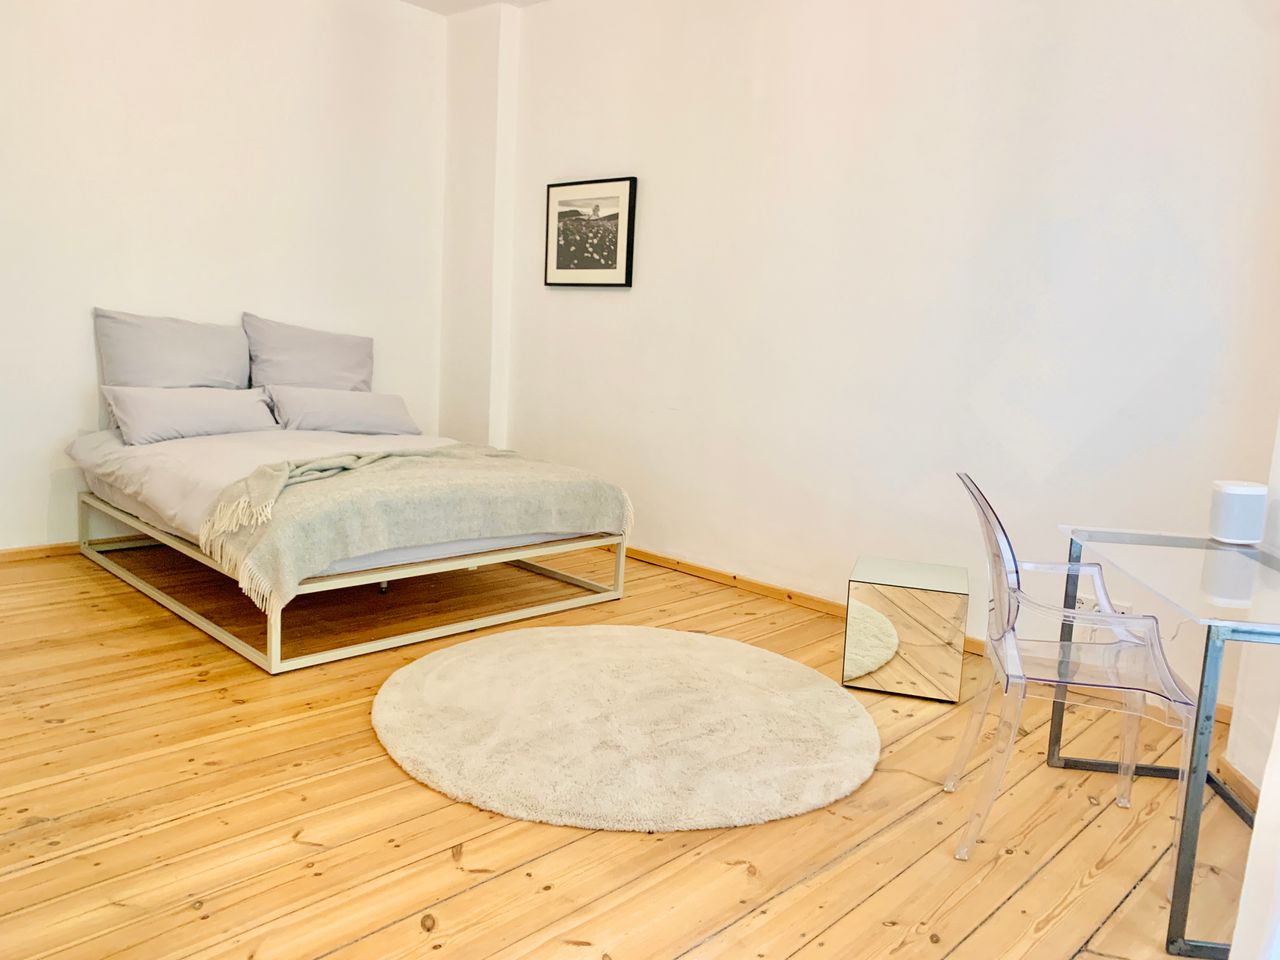 Just bring your suitcase! Minimal meets comfort in peaceful city studio.